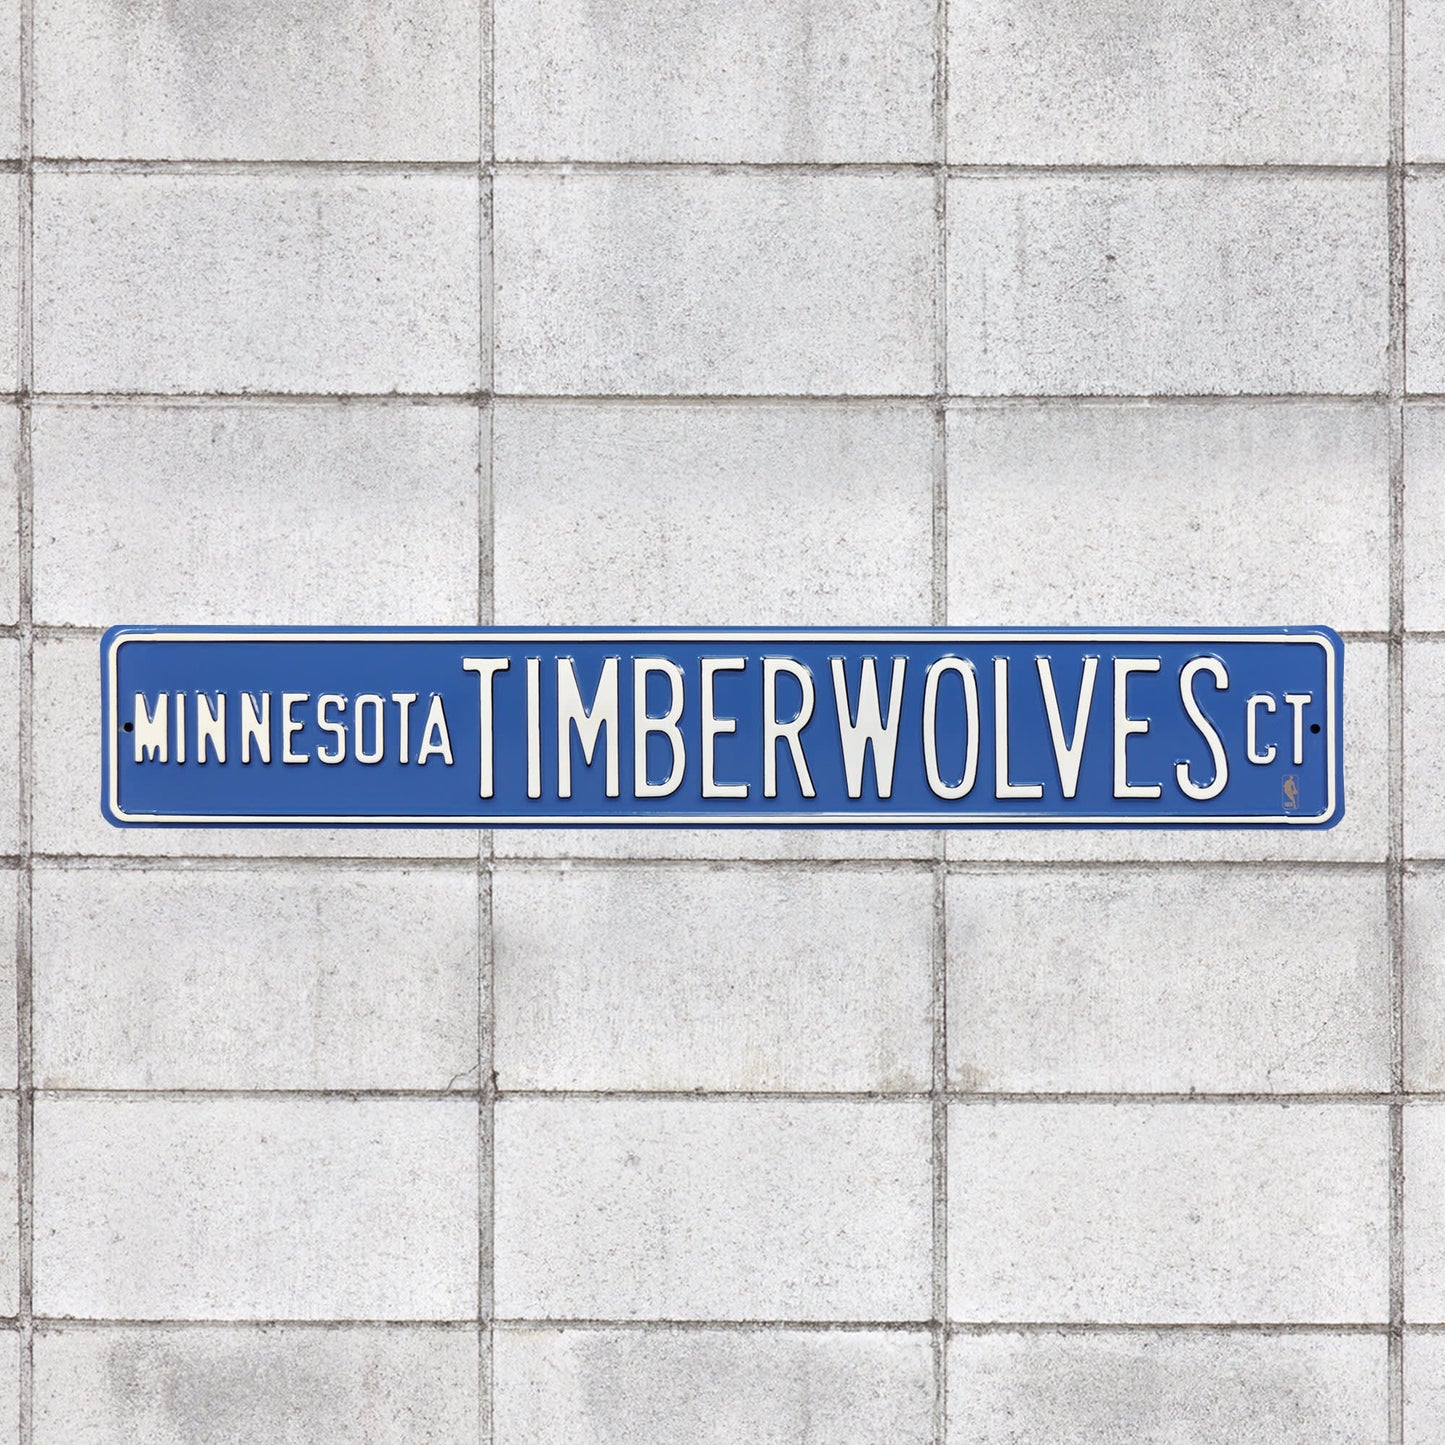 Minnesota Timberwolves: Court - Officially Licensed NBA Metal Street Sign